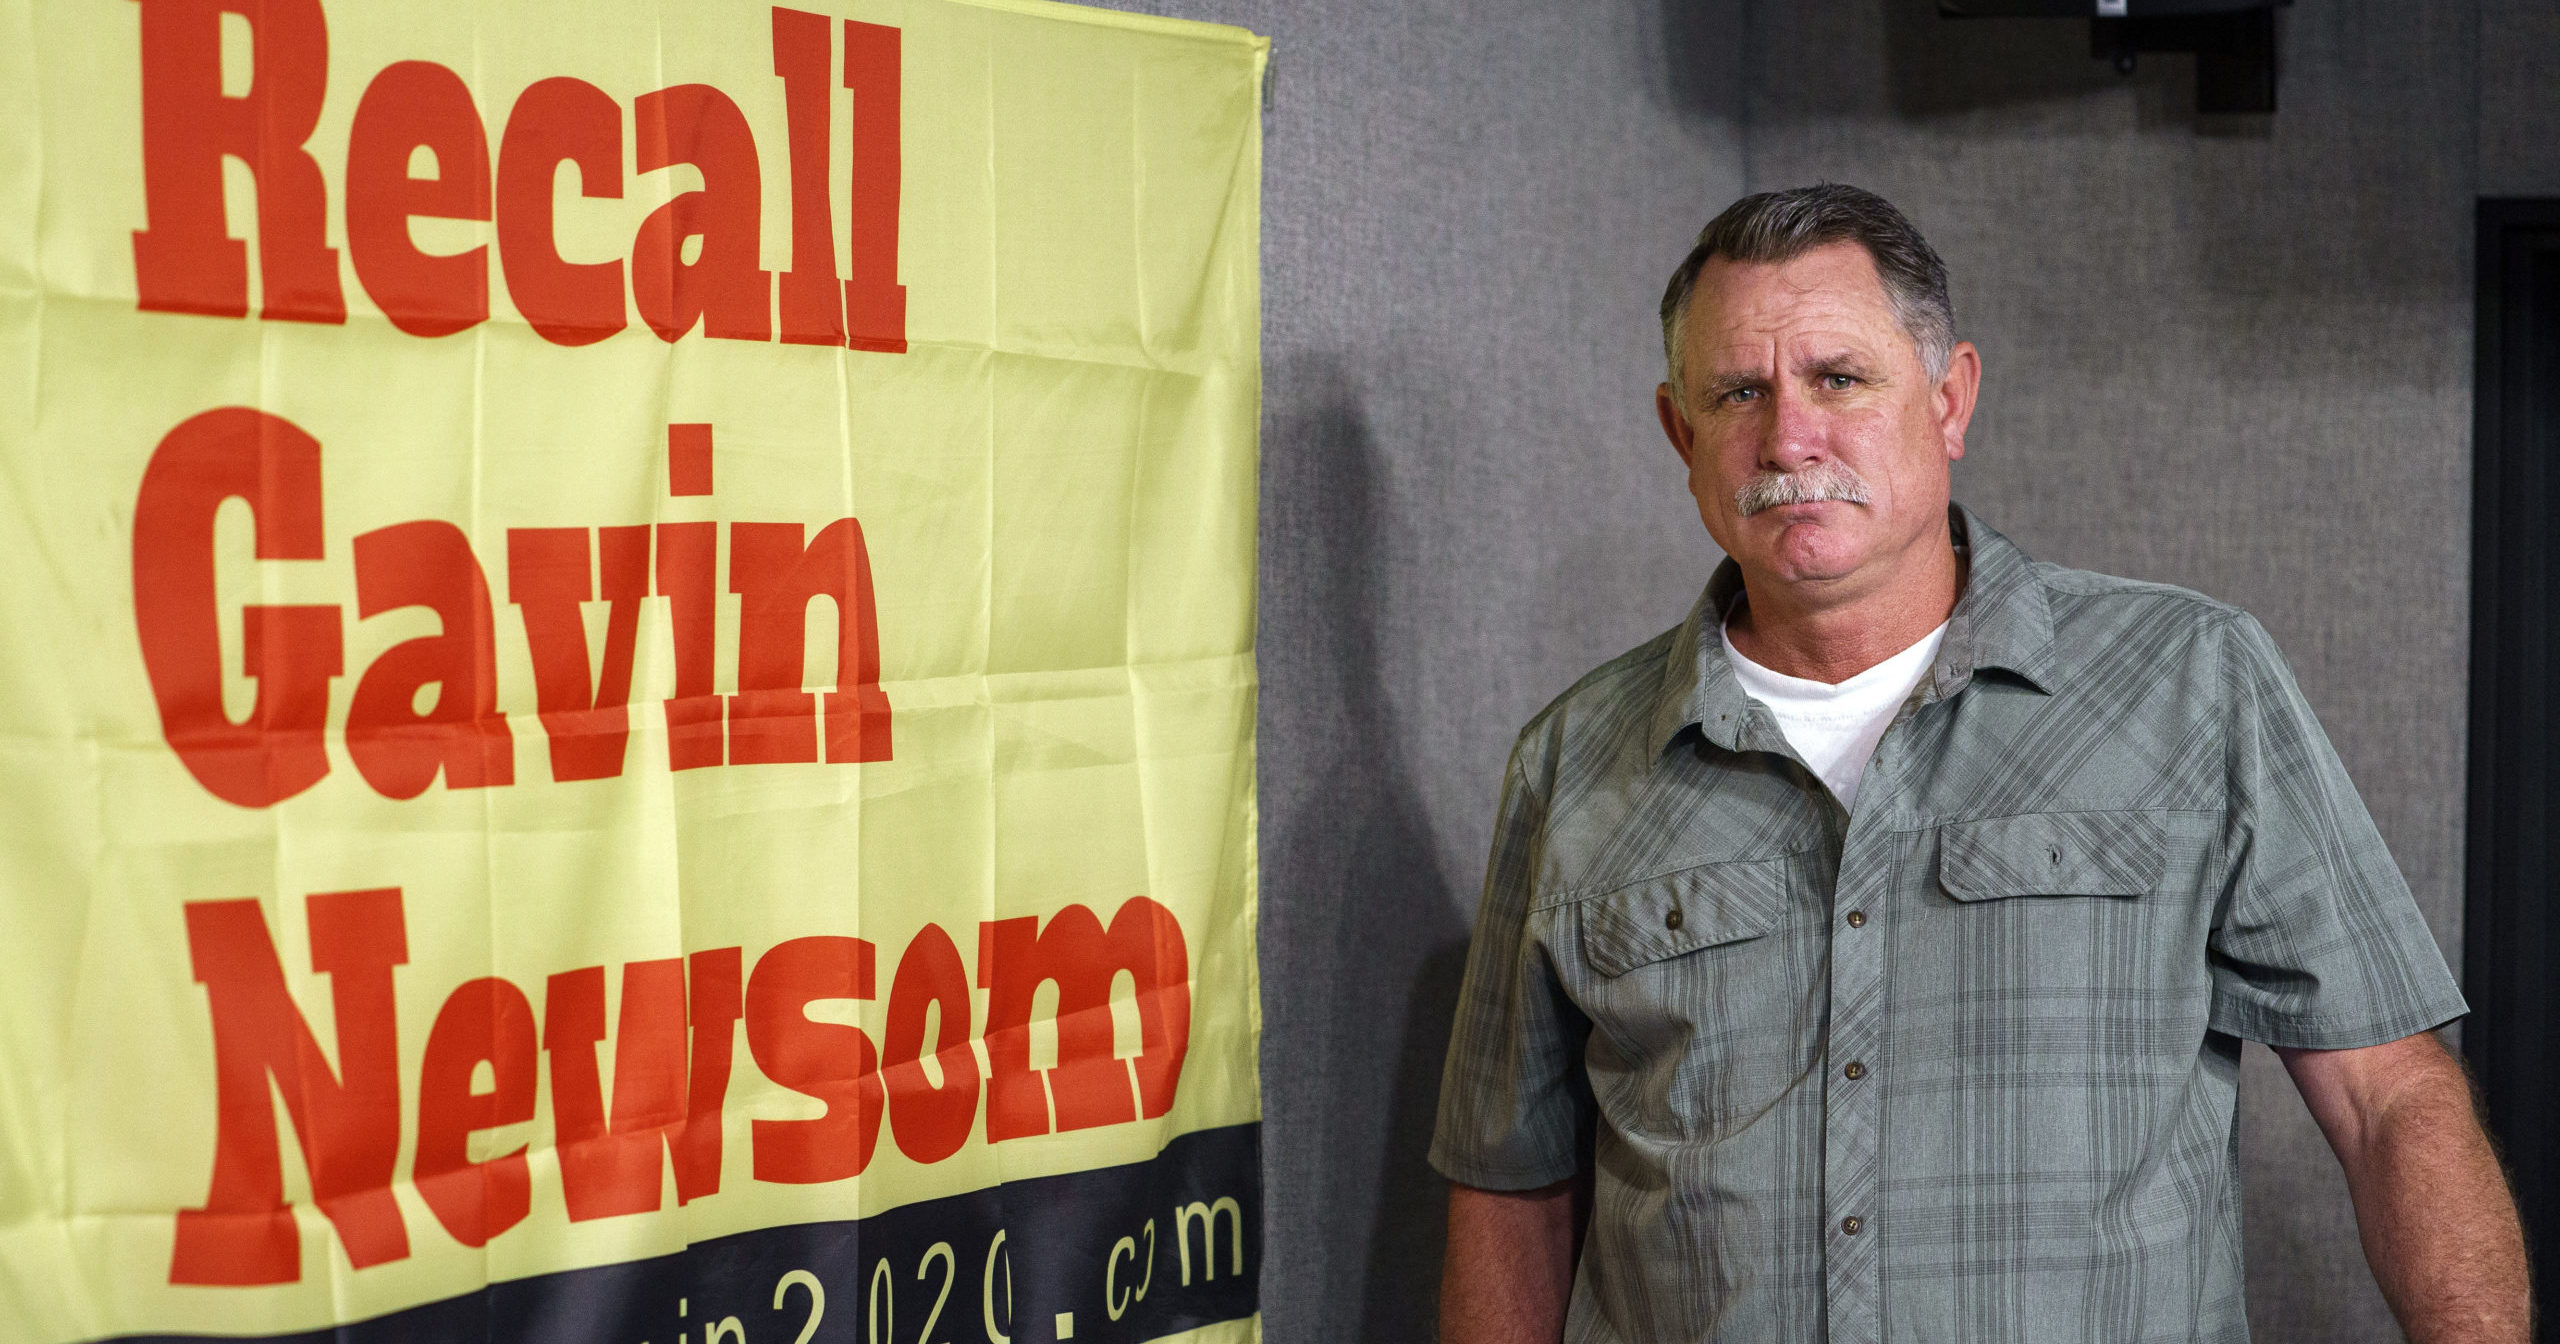 Orrin Heatlie, the main organizer of the campaign to recall California Gov. Newsom, poses with a banner before recording a radio program at the KABC radio station studio in Culver City, California, on March 27, 2021.